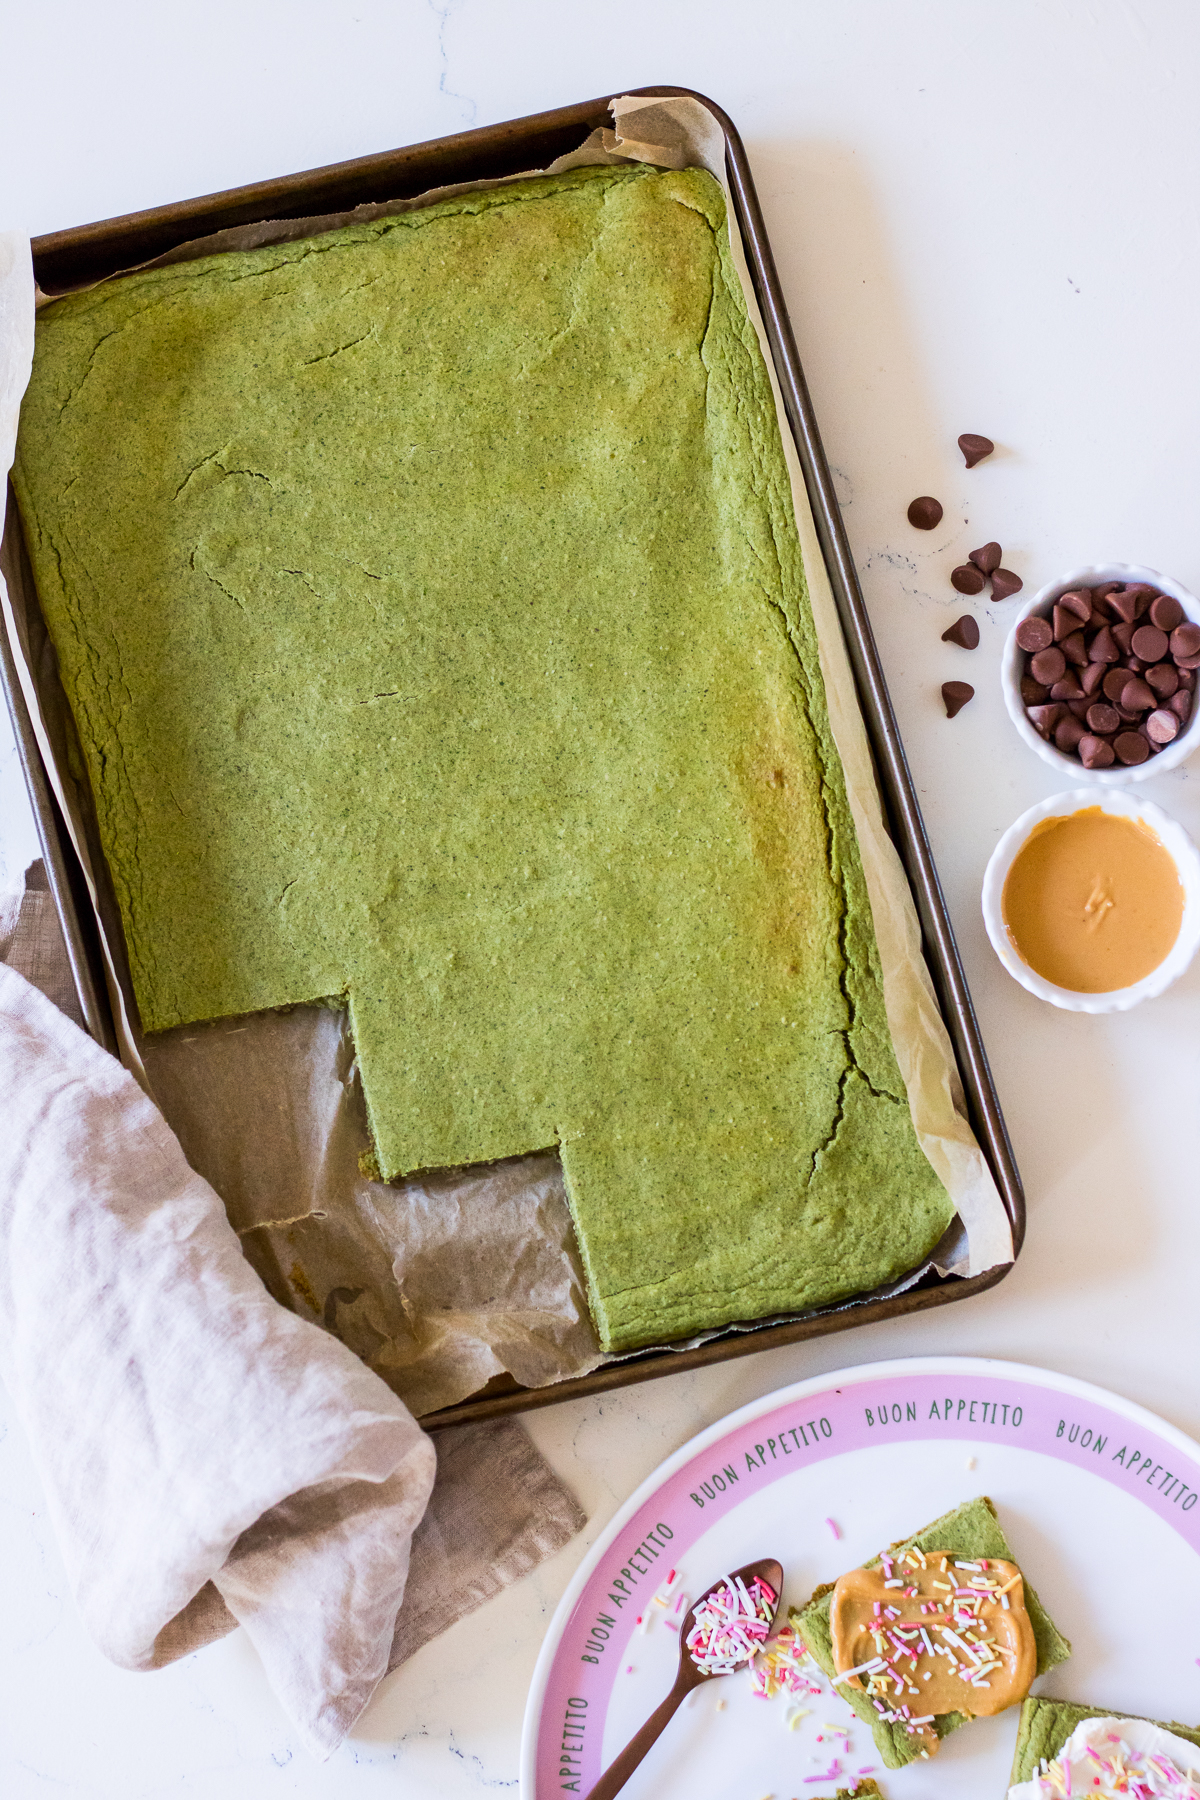 Image of green pancakes baked into a large sheet pan, some cut into square shape with peanut butter and sprinkles